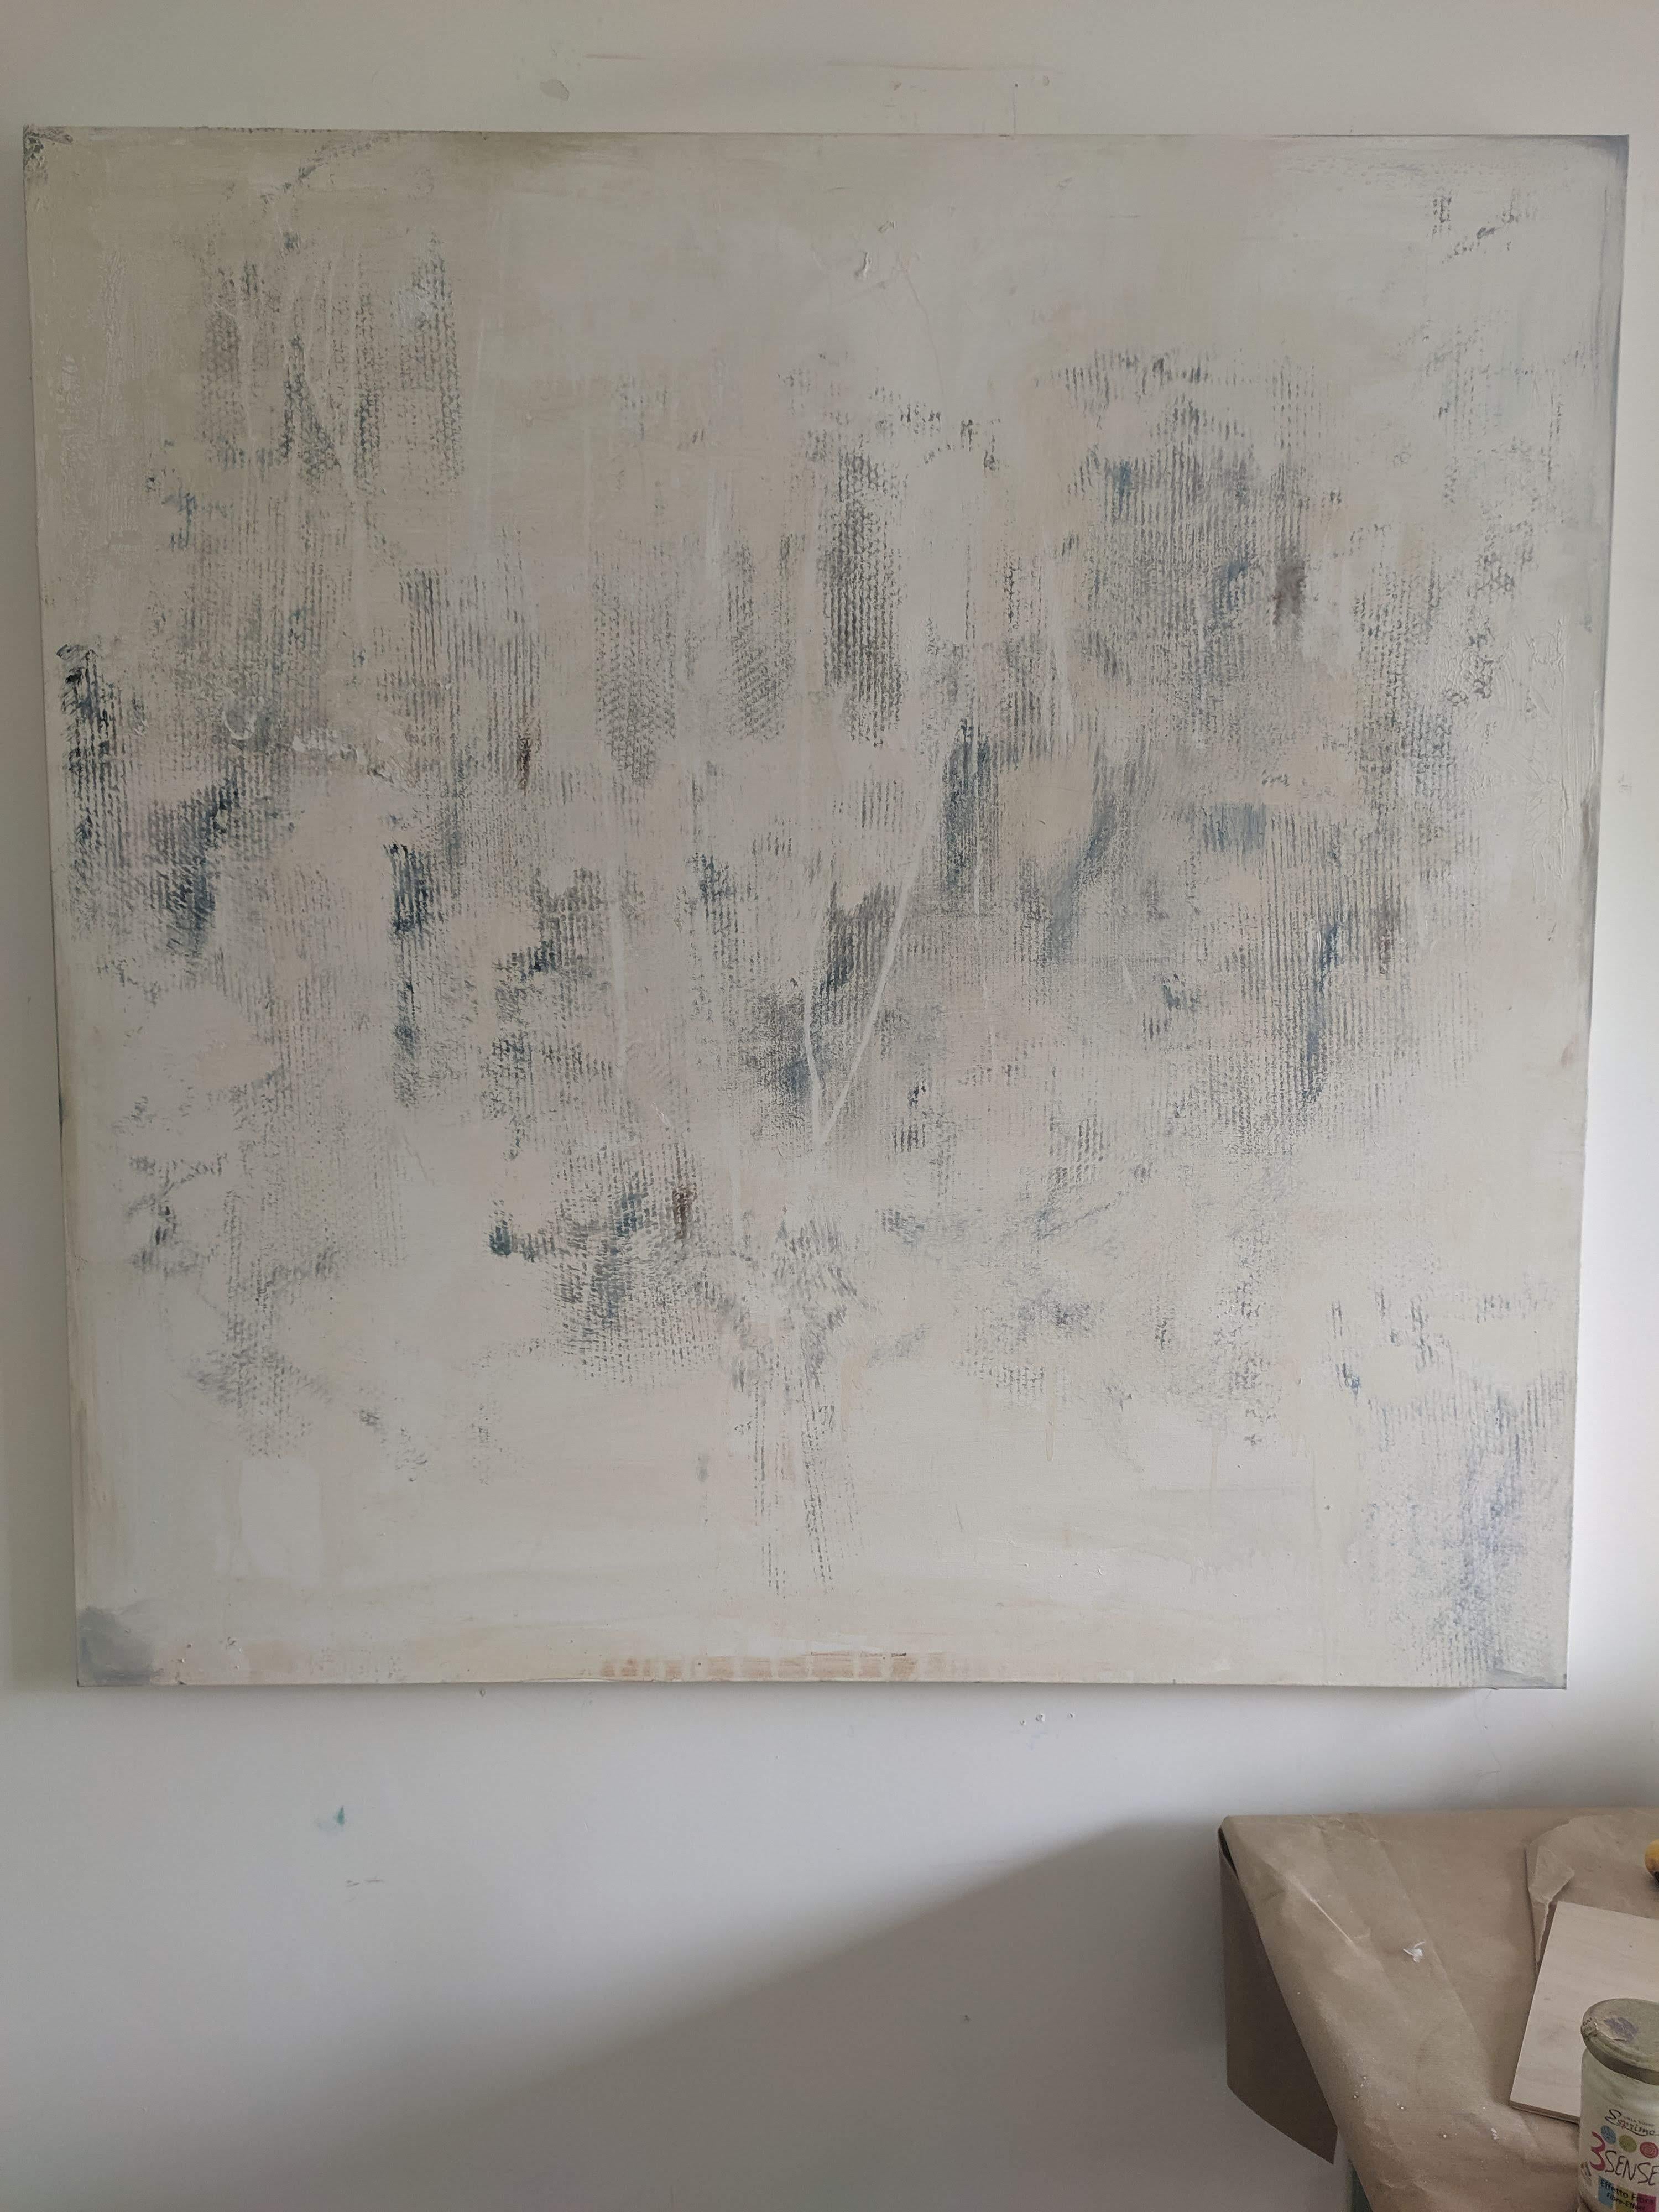 Signs 
mixed media on canvas 
original artwork

Original Created:2019
Subjects:Landscape
Materials: Canvas
Styles: #Abstract #AbstractExpressionism #Minimalism #Modern #Expressionism

PaperLandscape is a series of artworks inspired by landscape and